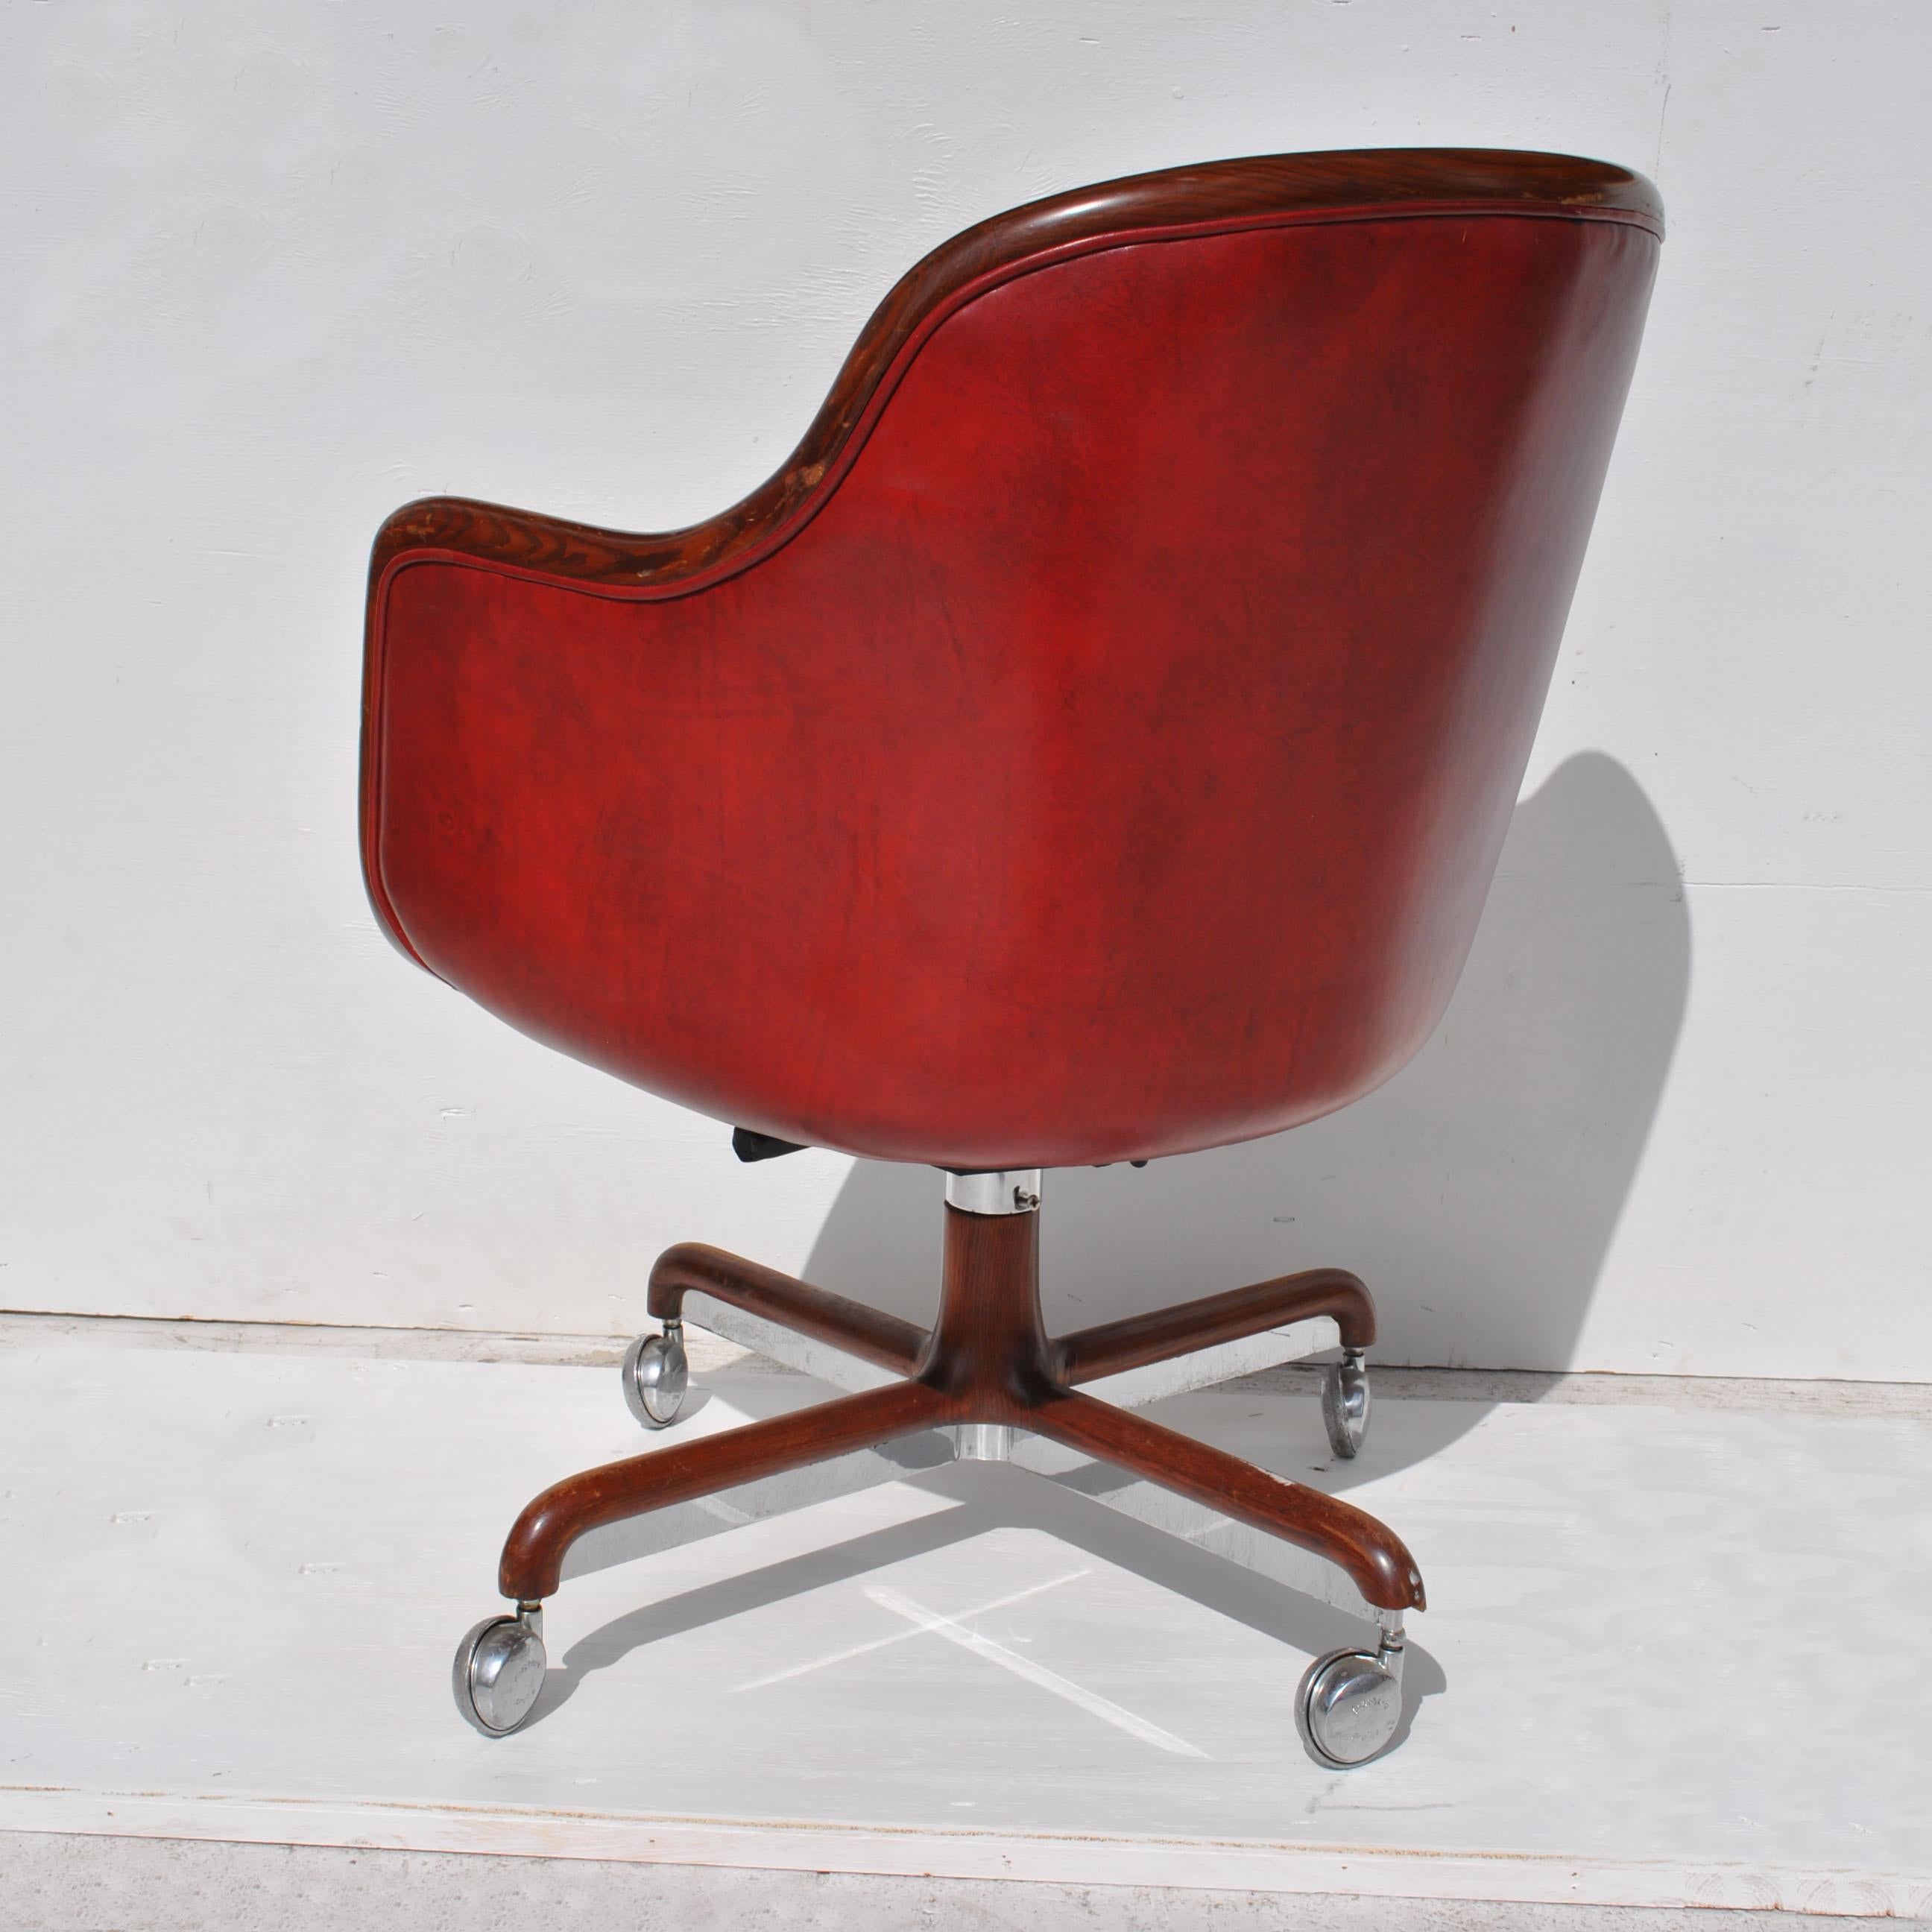 One Vintage Midcentury Ward Bennett Brickel Executive Chair In Good Condition For Sale In Pasadena, TX